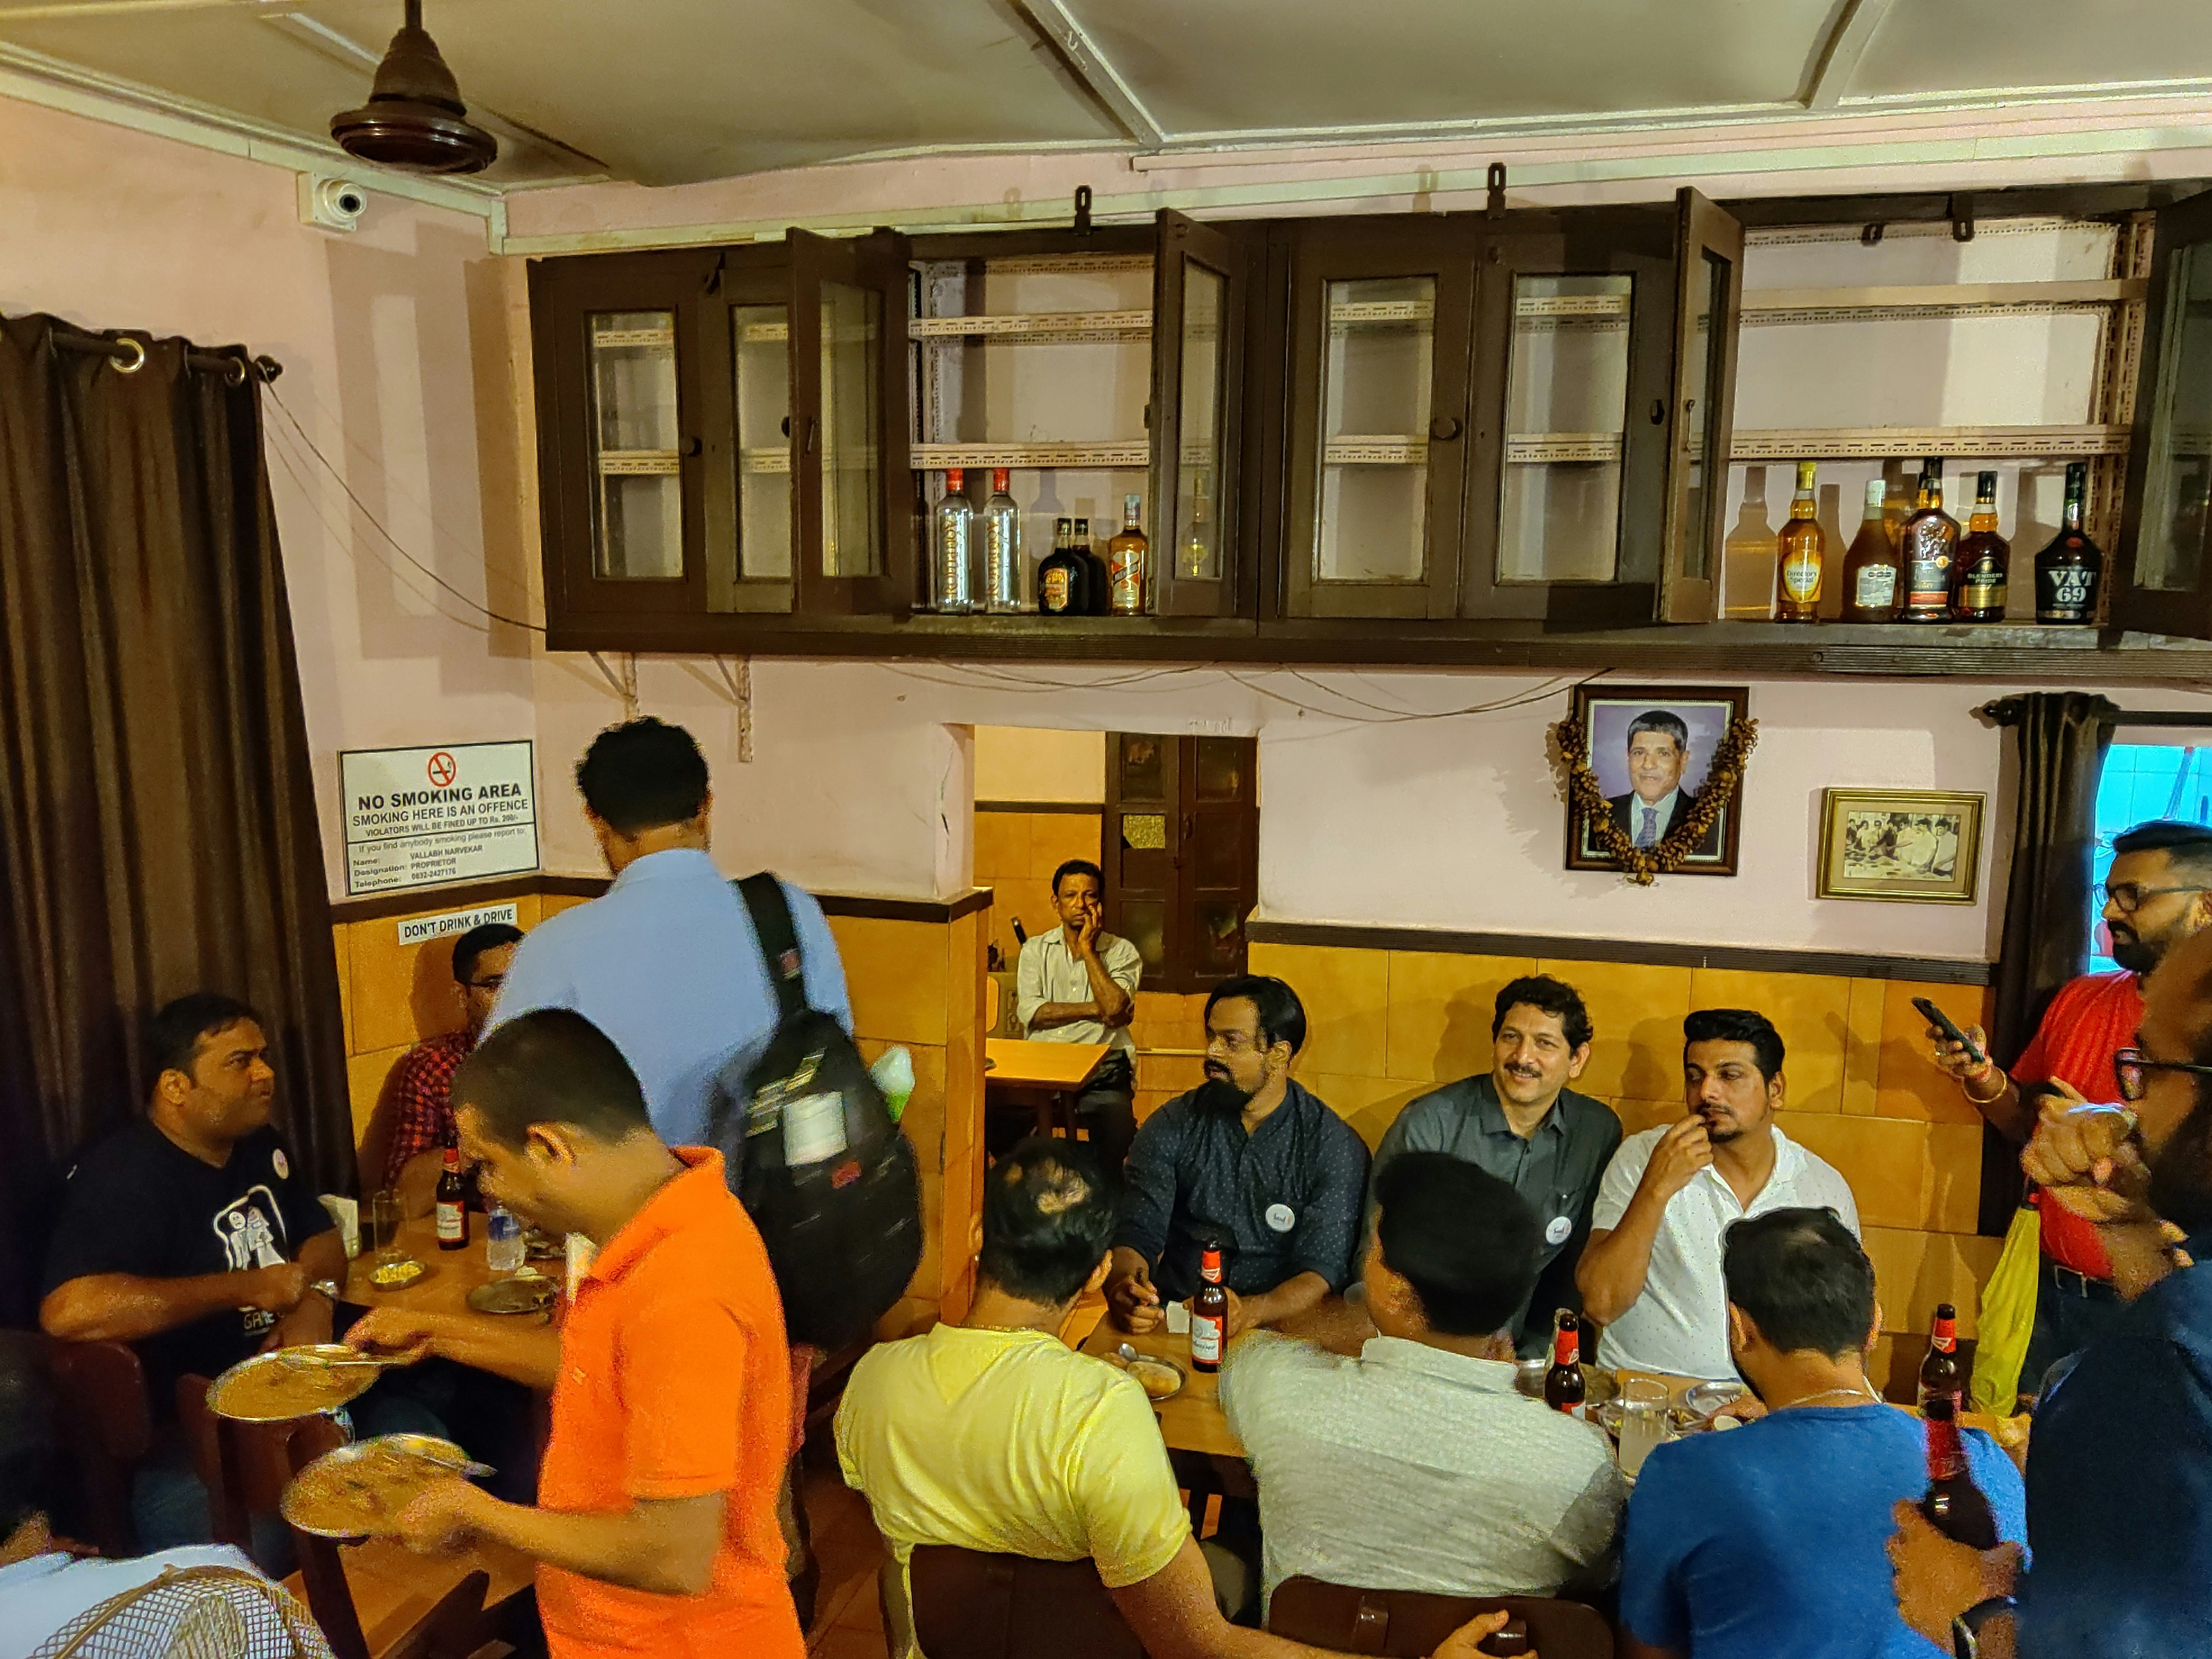 Patrons gather in the white and ochre interior of Panjim Tavern, where brown wood cabinets holding bottles of liquor hang high up on the wall